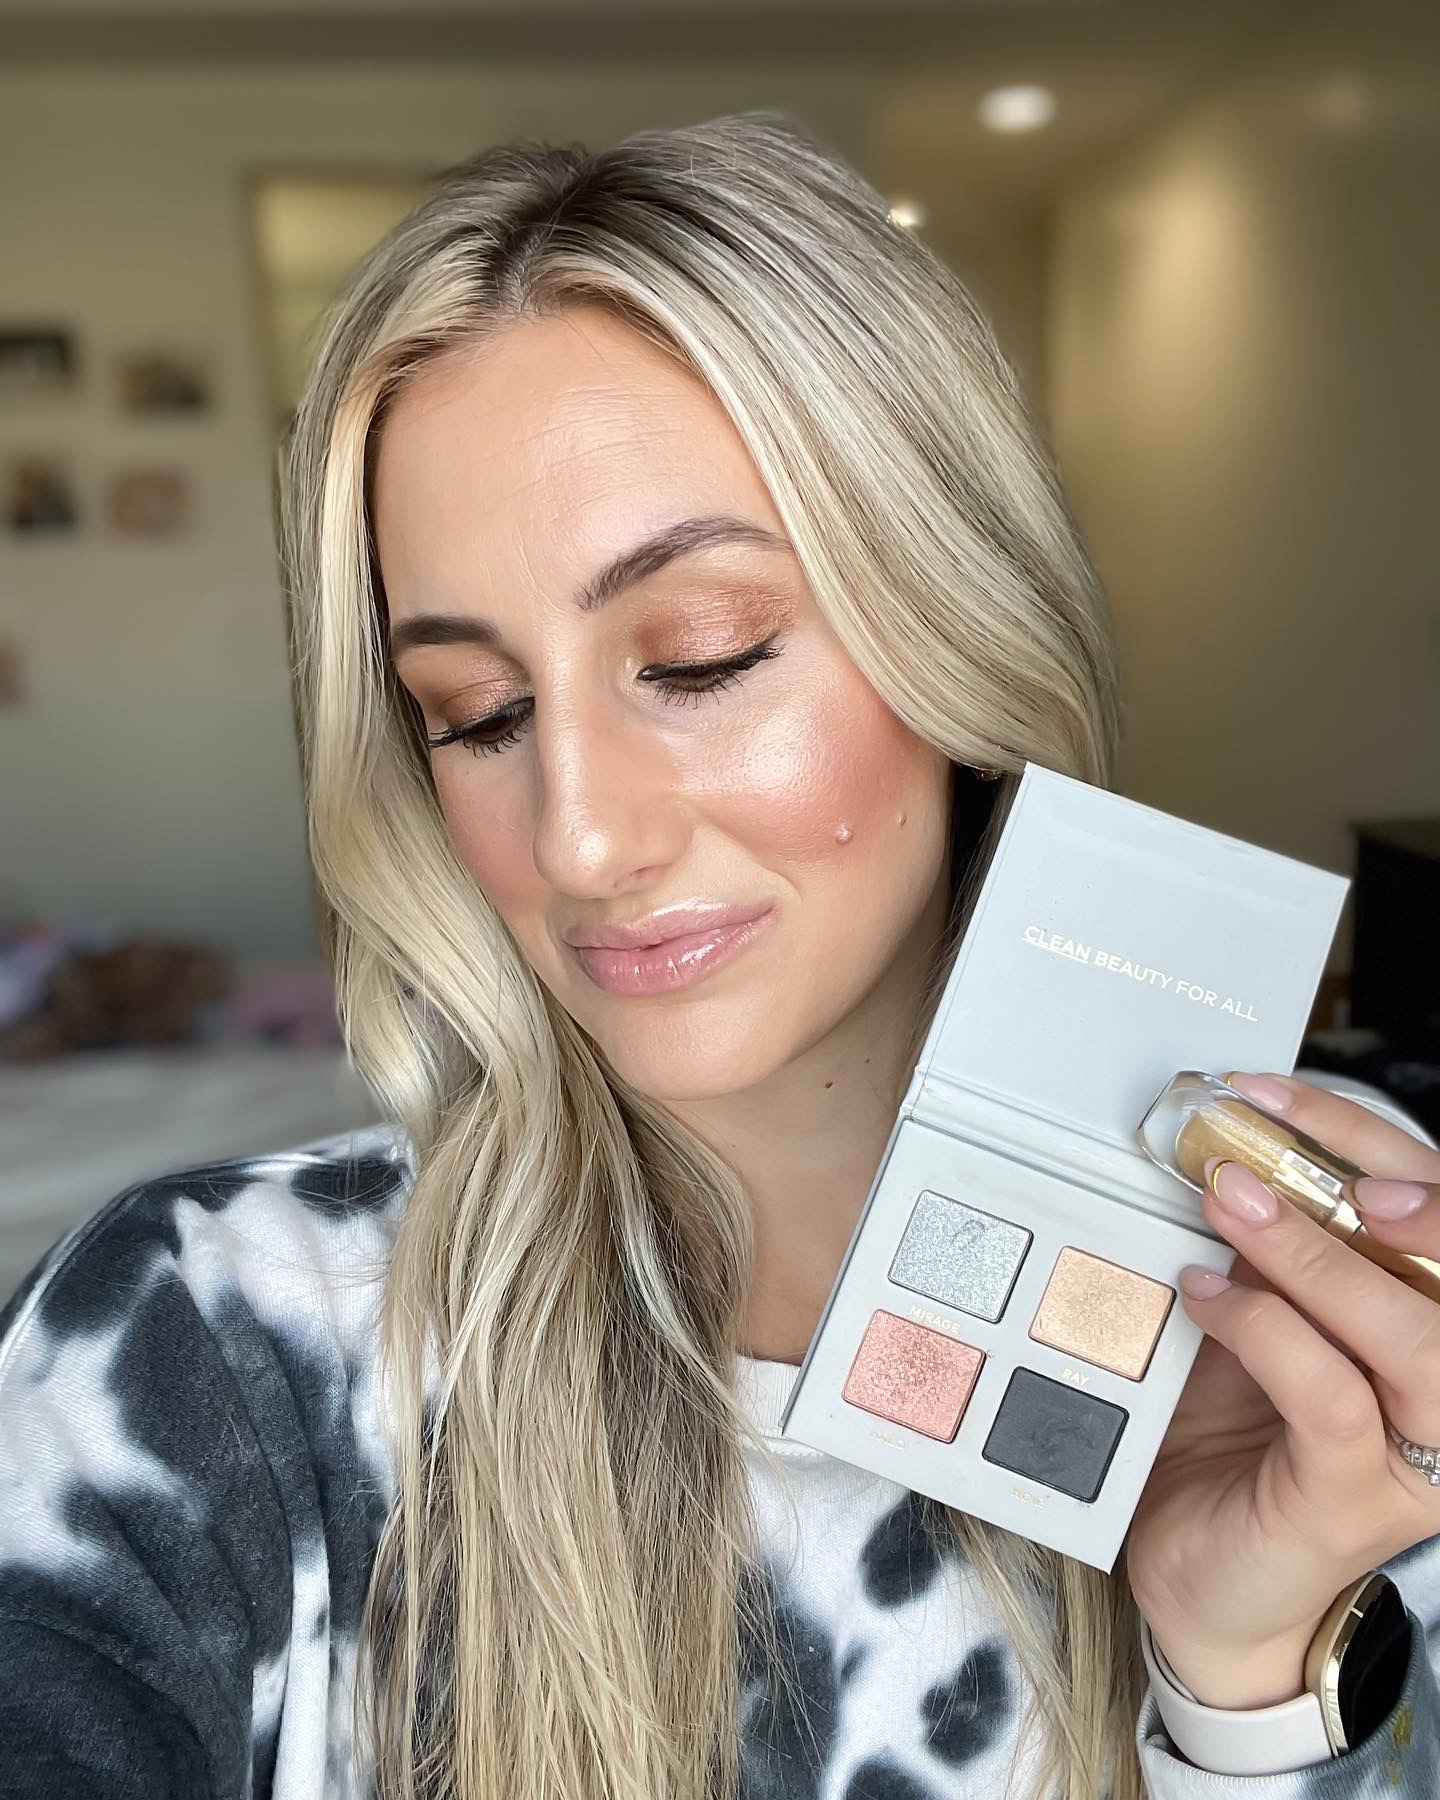 HMU artist and Beautycounter consultant Emily Barton shares her holiday eye shadow tutorial.